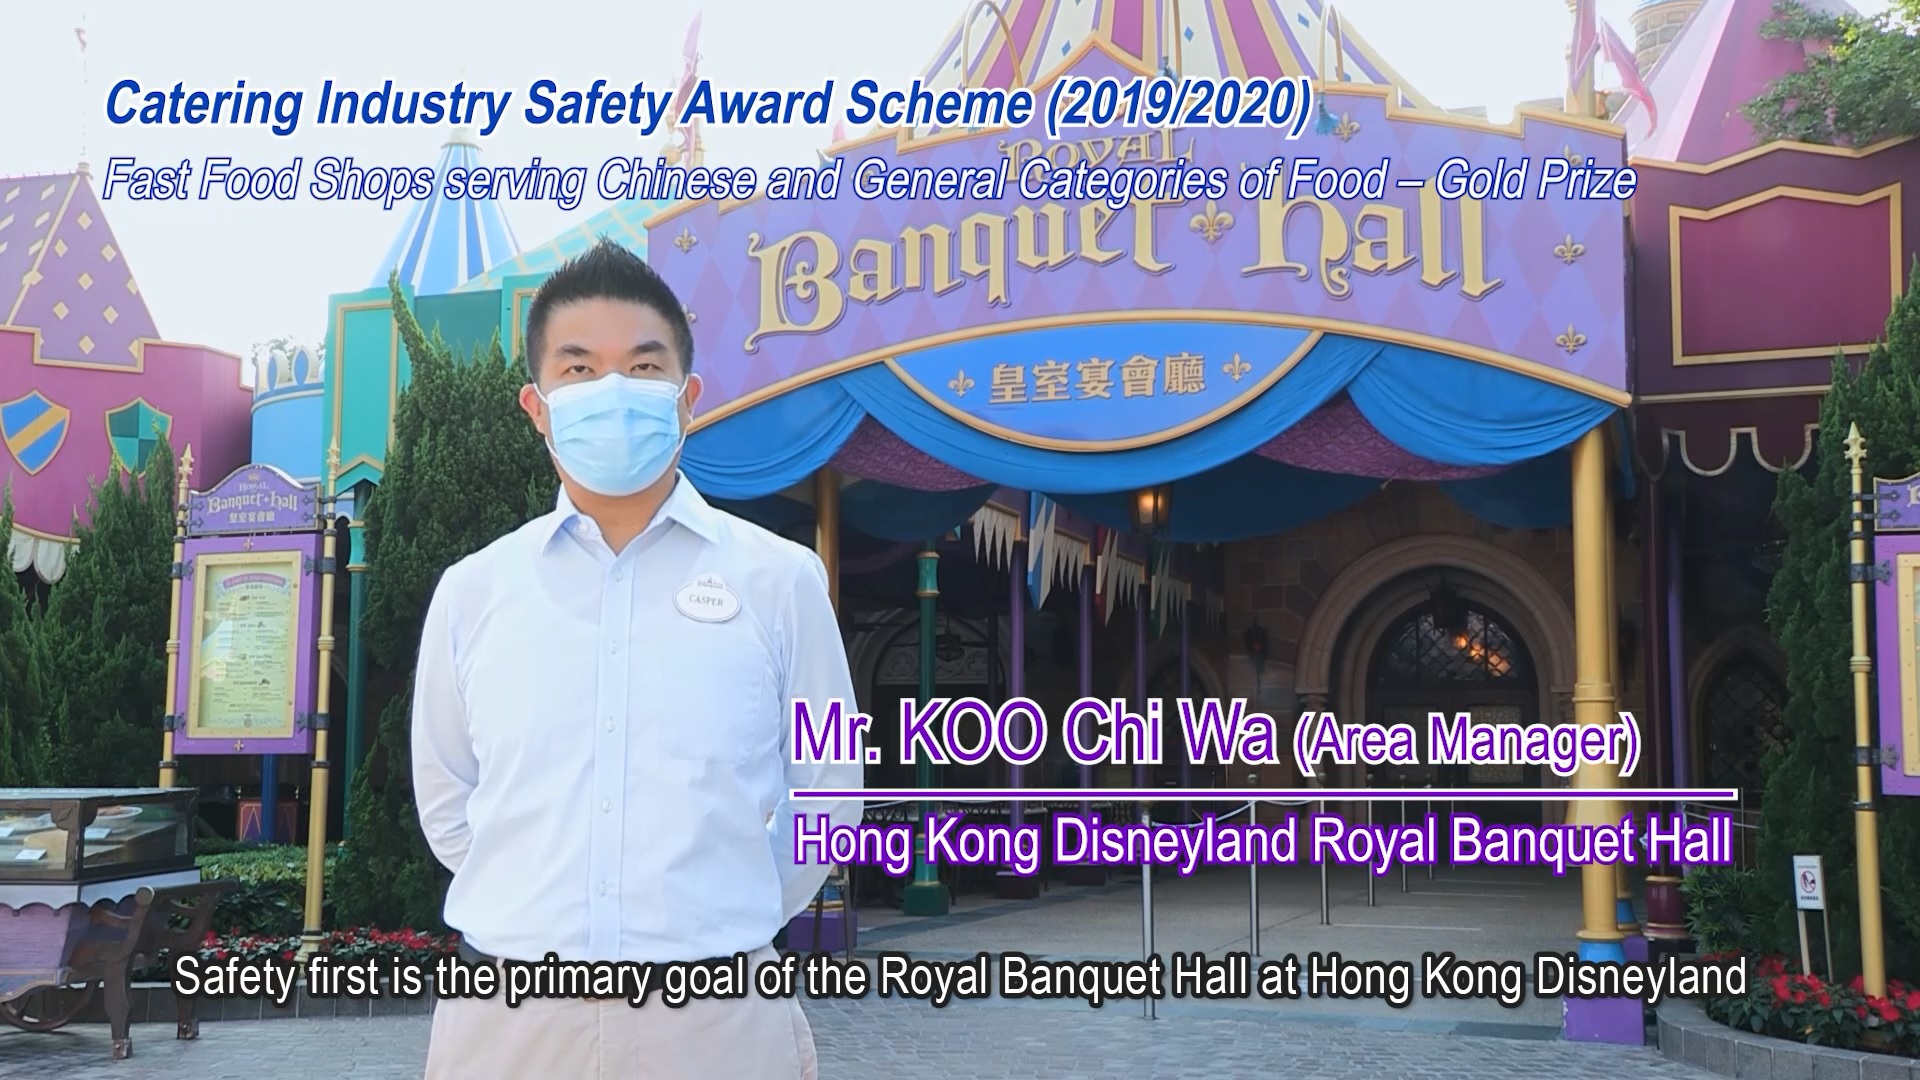 Hong Kong Disneyland Royal Banquet Hall Fast Food Shops serving Chinese and General Categories of Food Sub-category